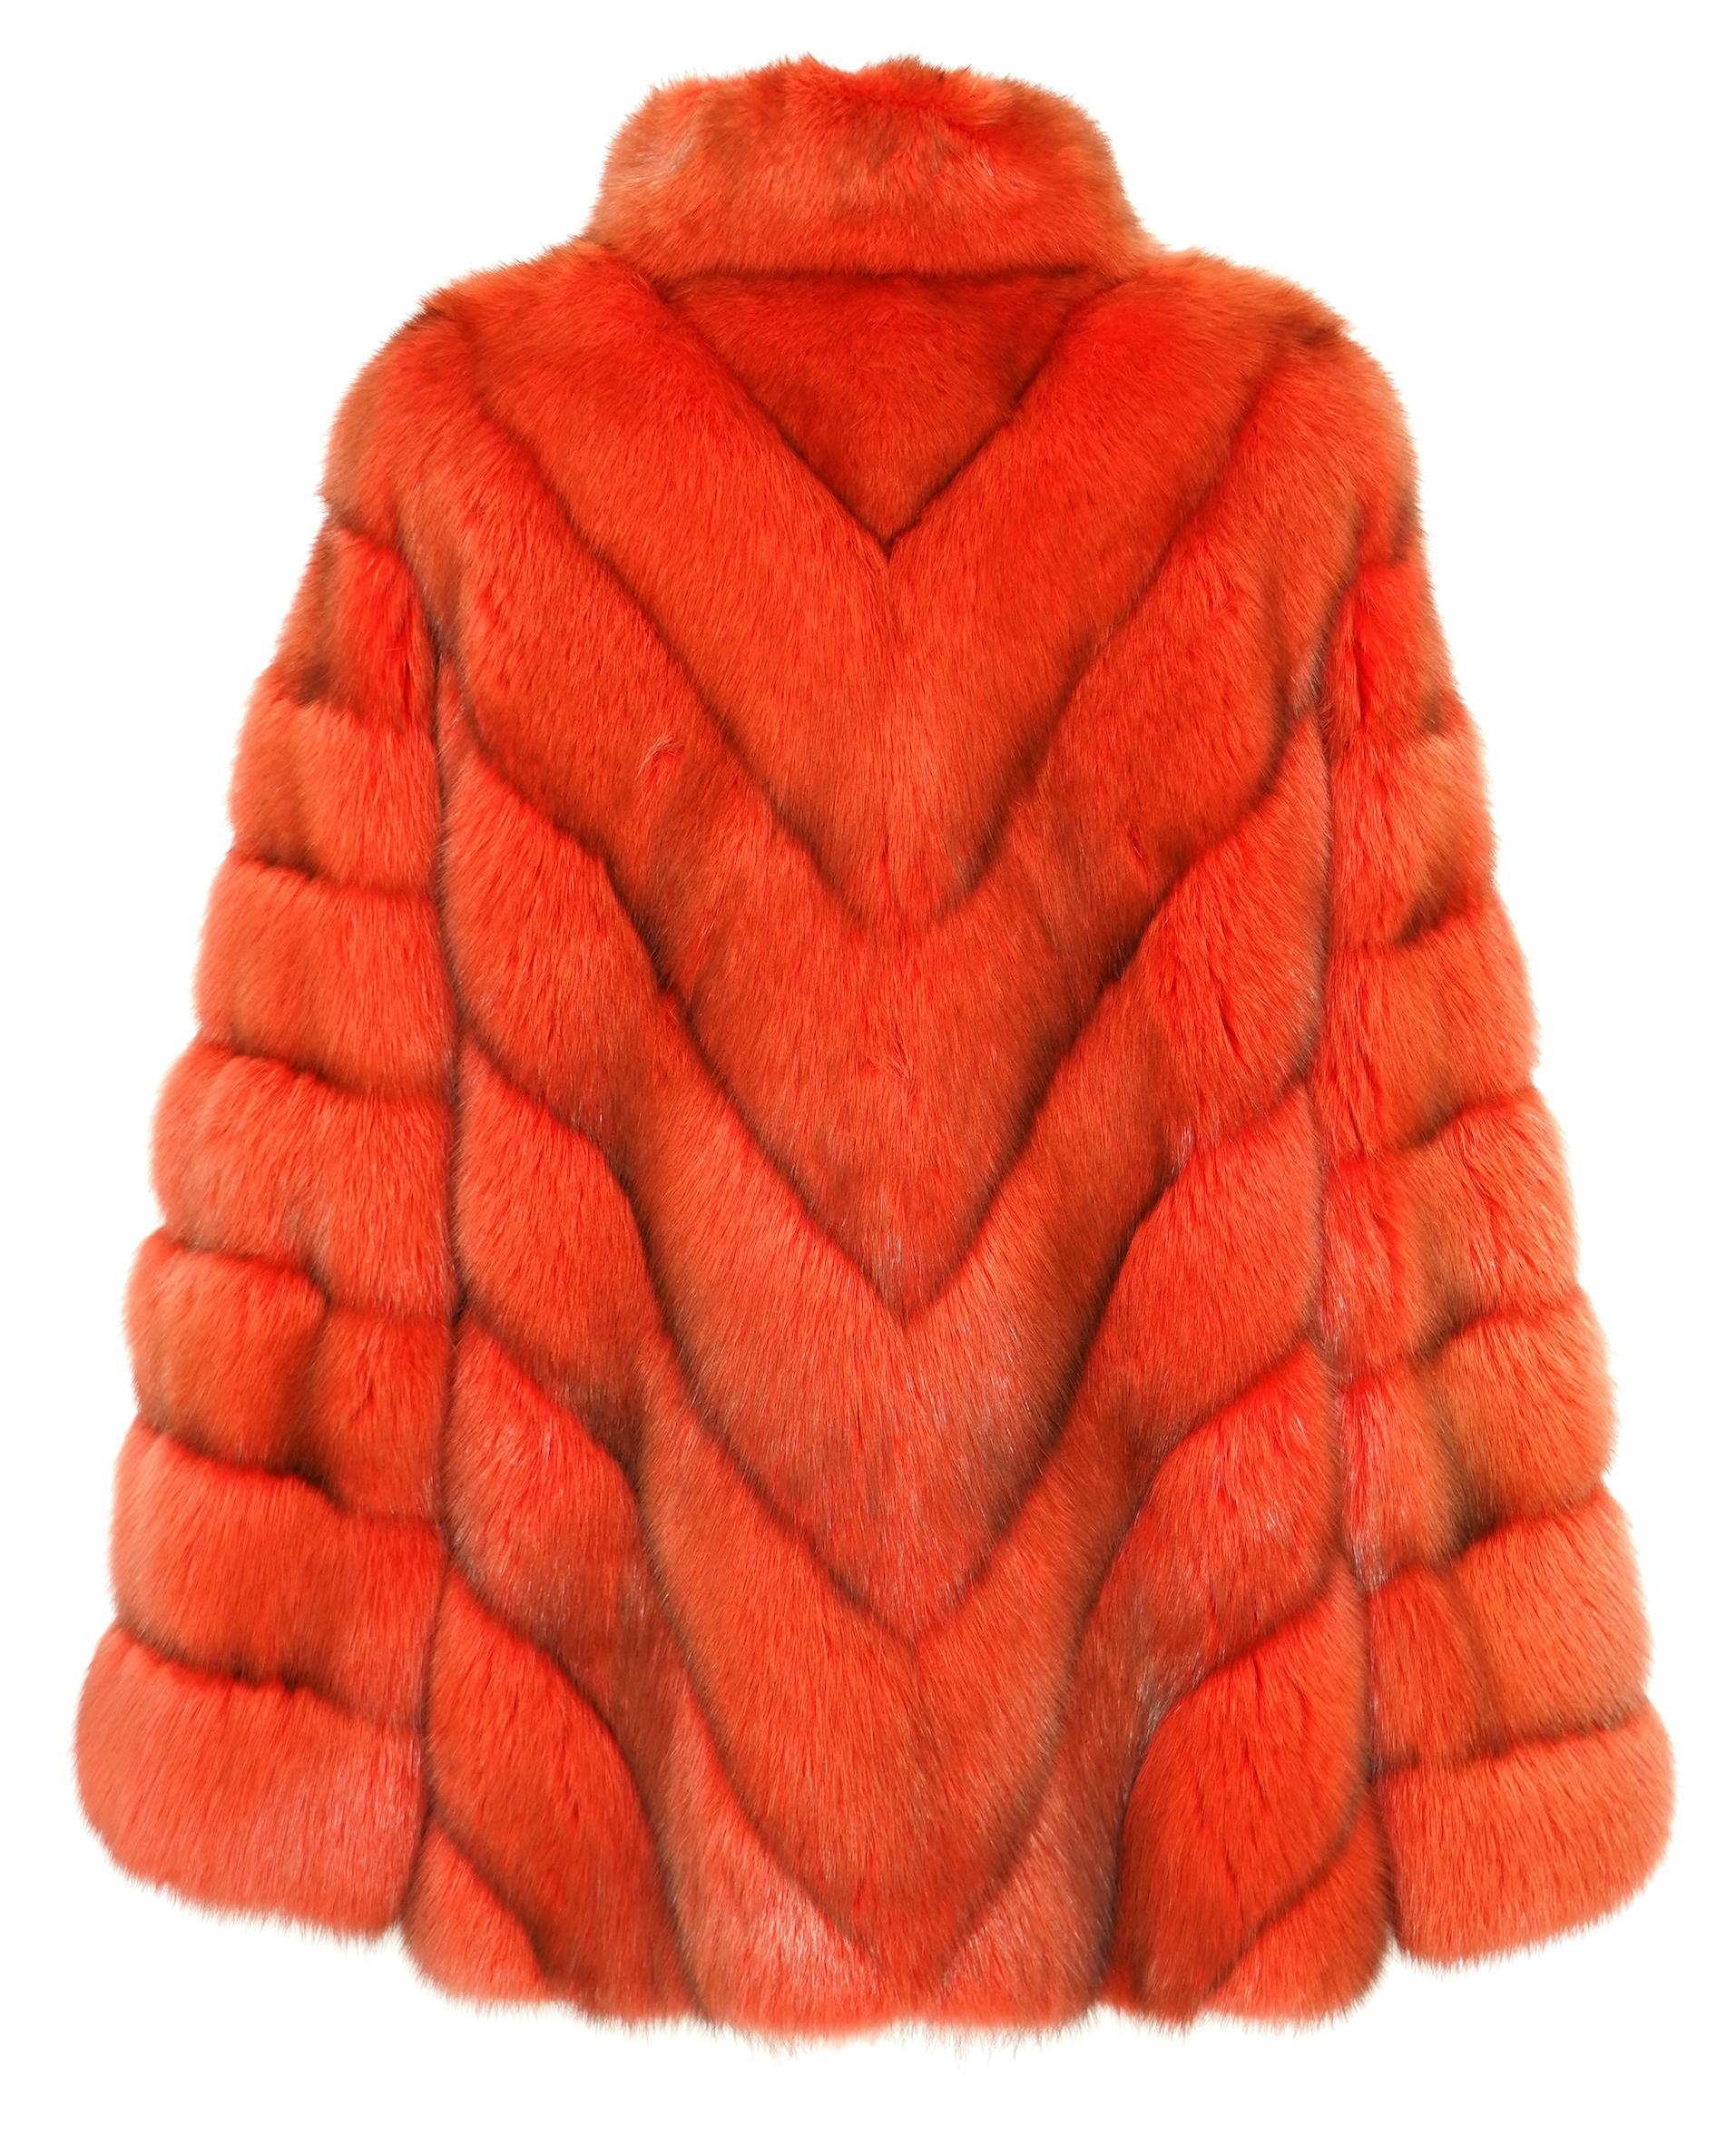 Helen Yarmak Barguzin Red Sable Jacket In New Condition For Sale In New York, NY